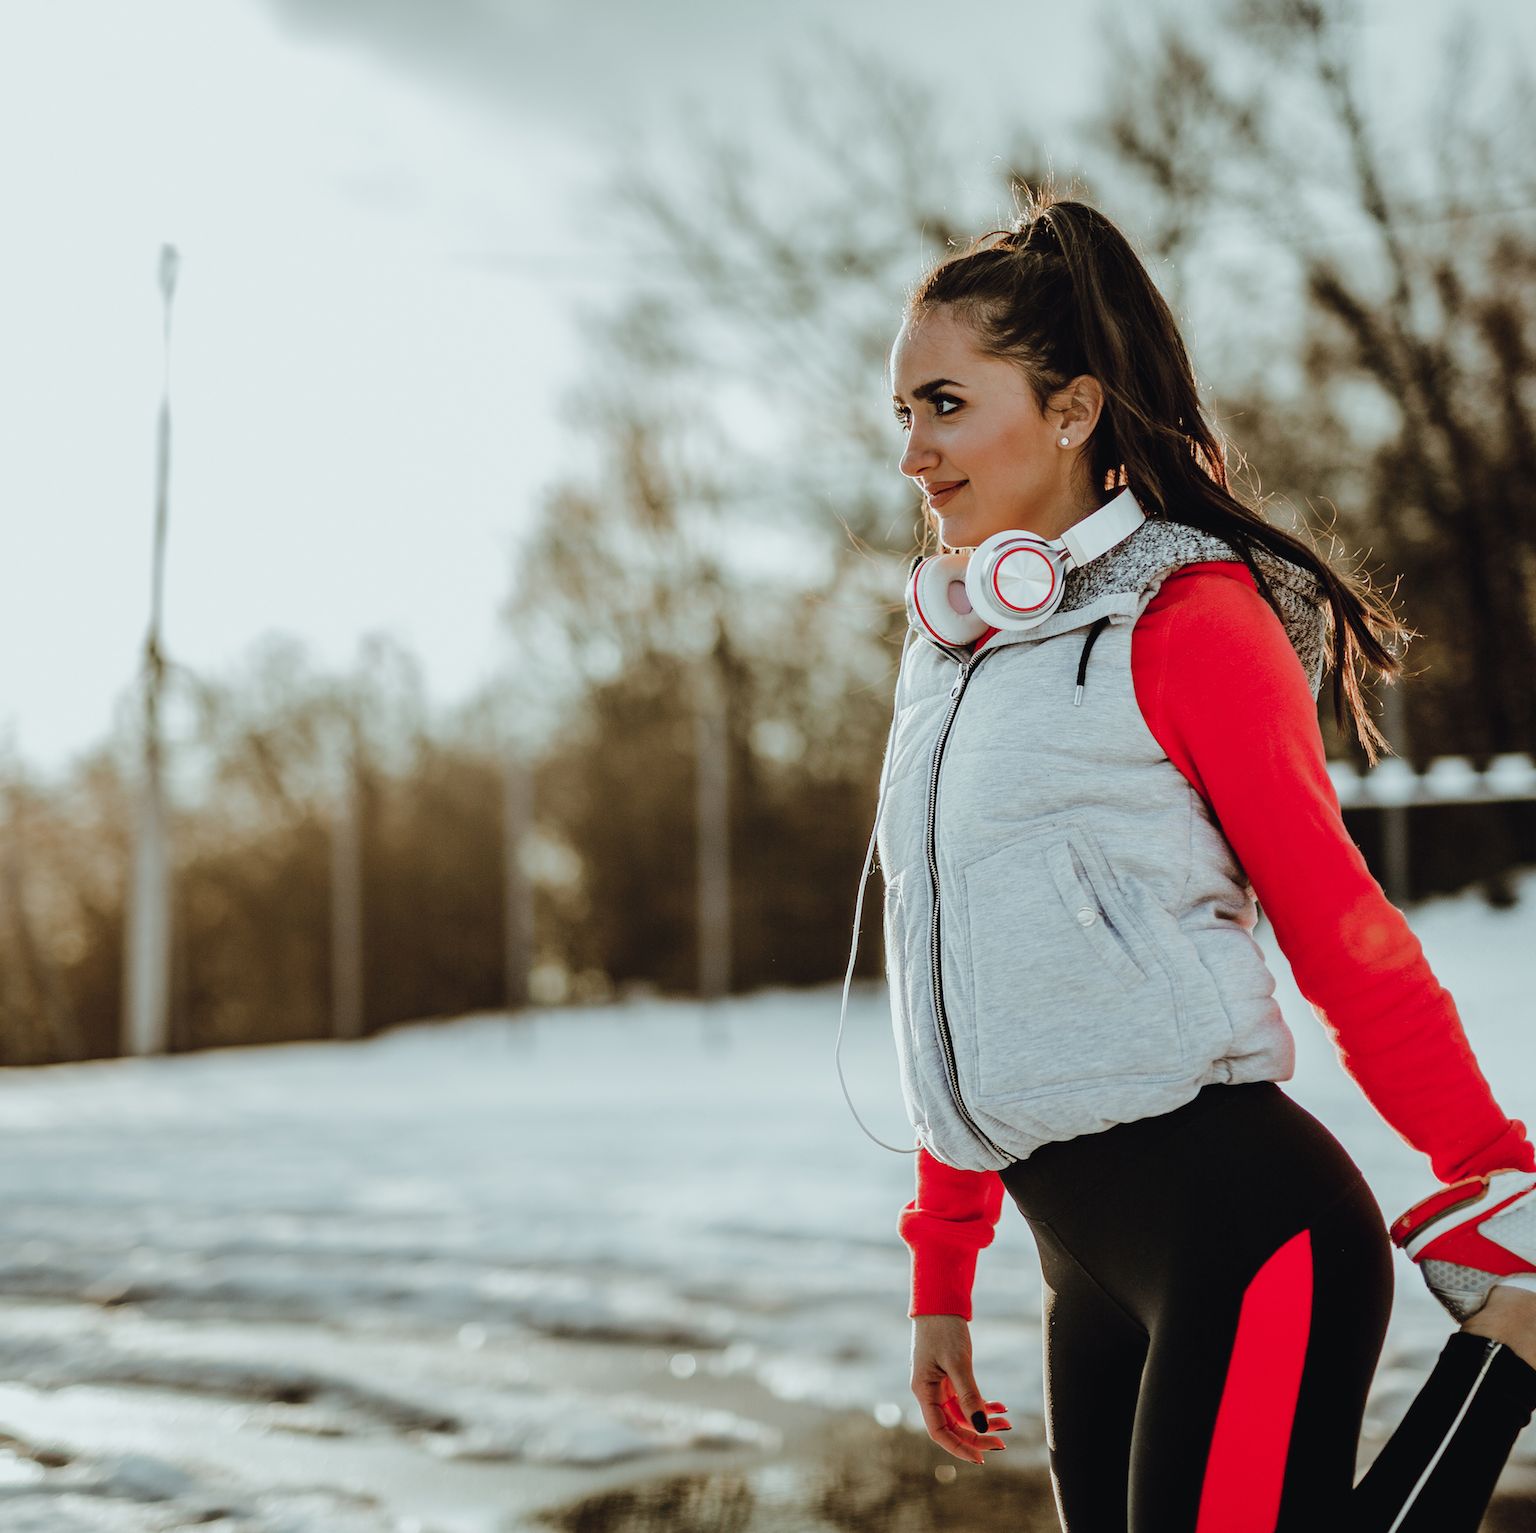 Ideas for exercising outdoors: cold weather workout ideas